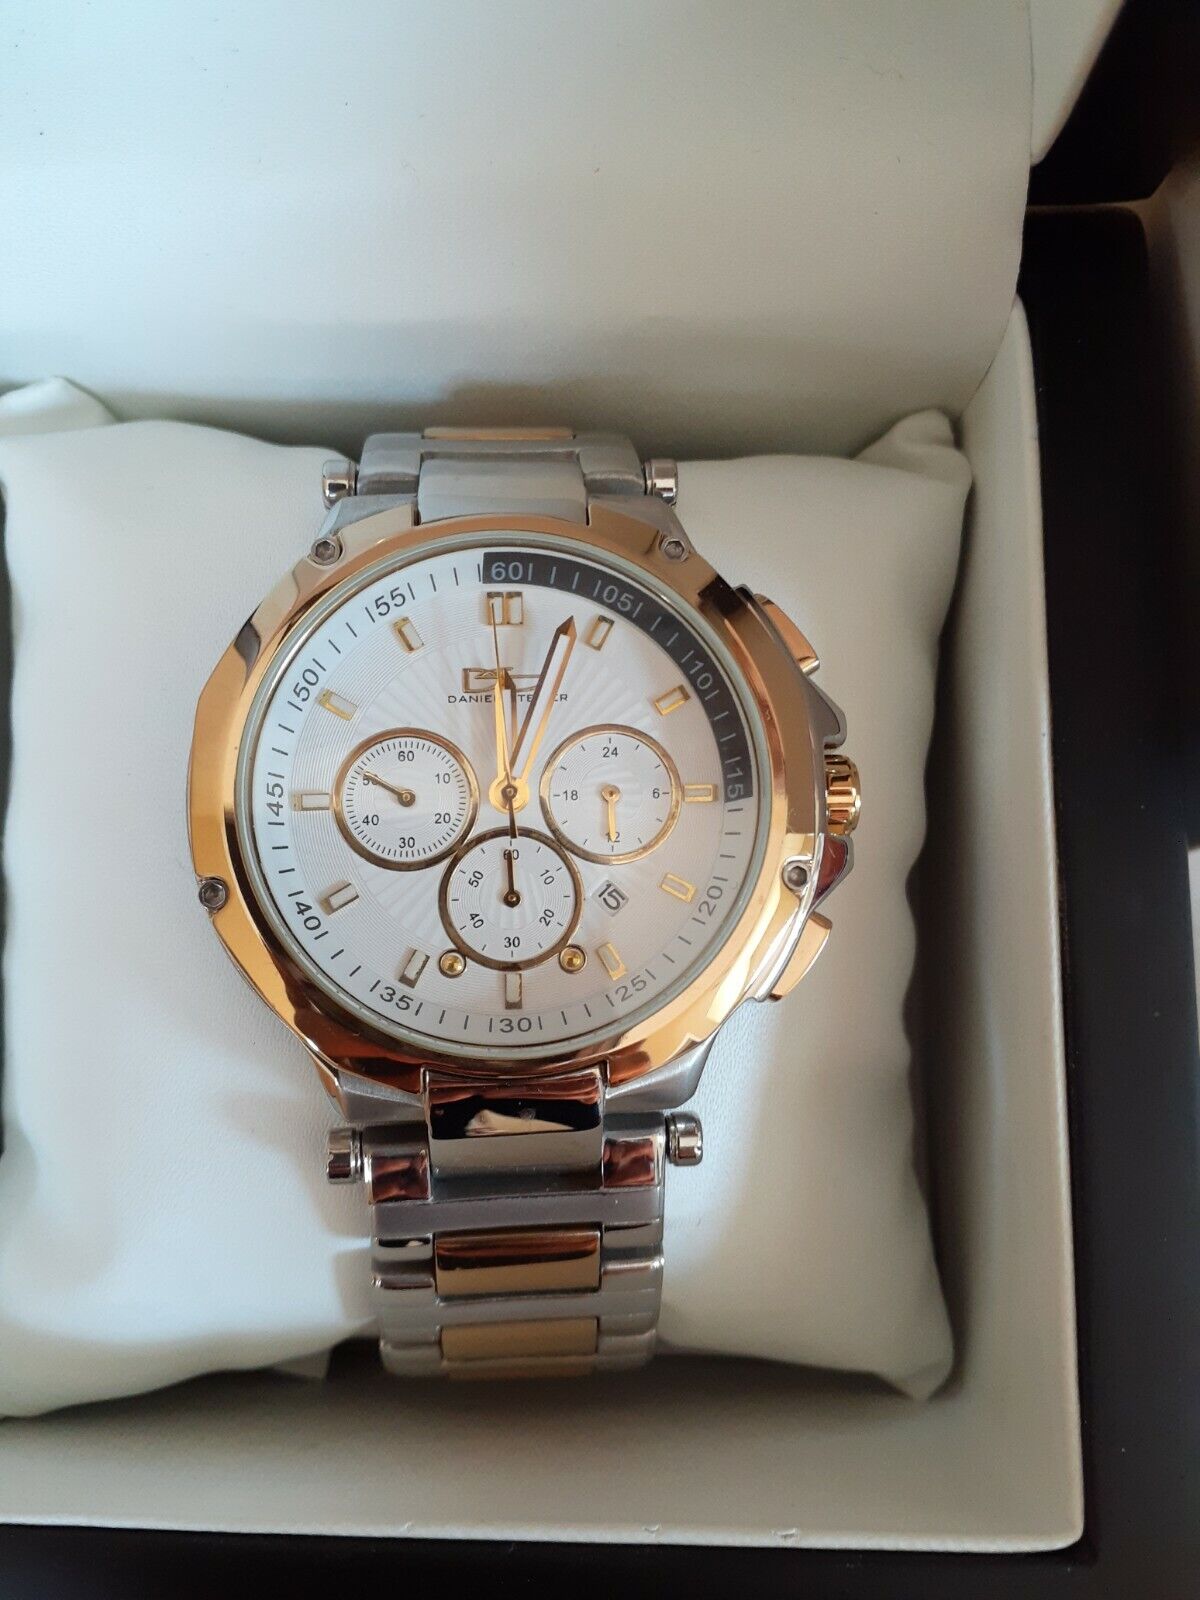 Men's Gold and Silver Daniel Steiger Chronograph Watch